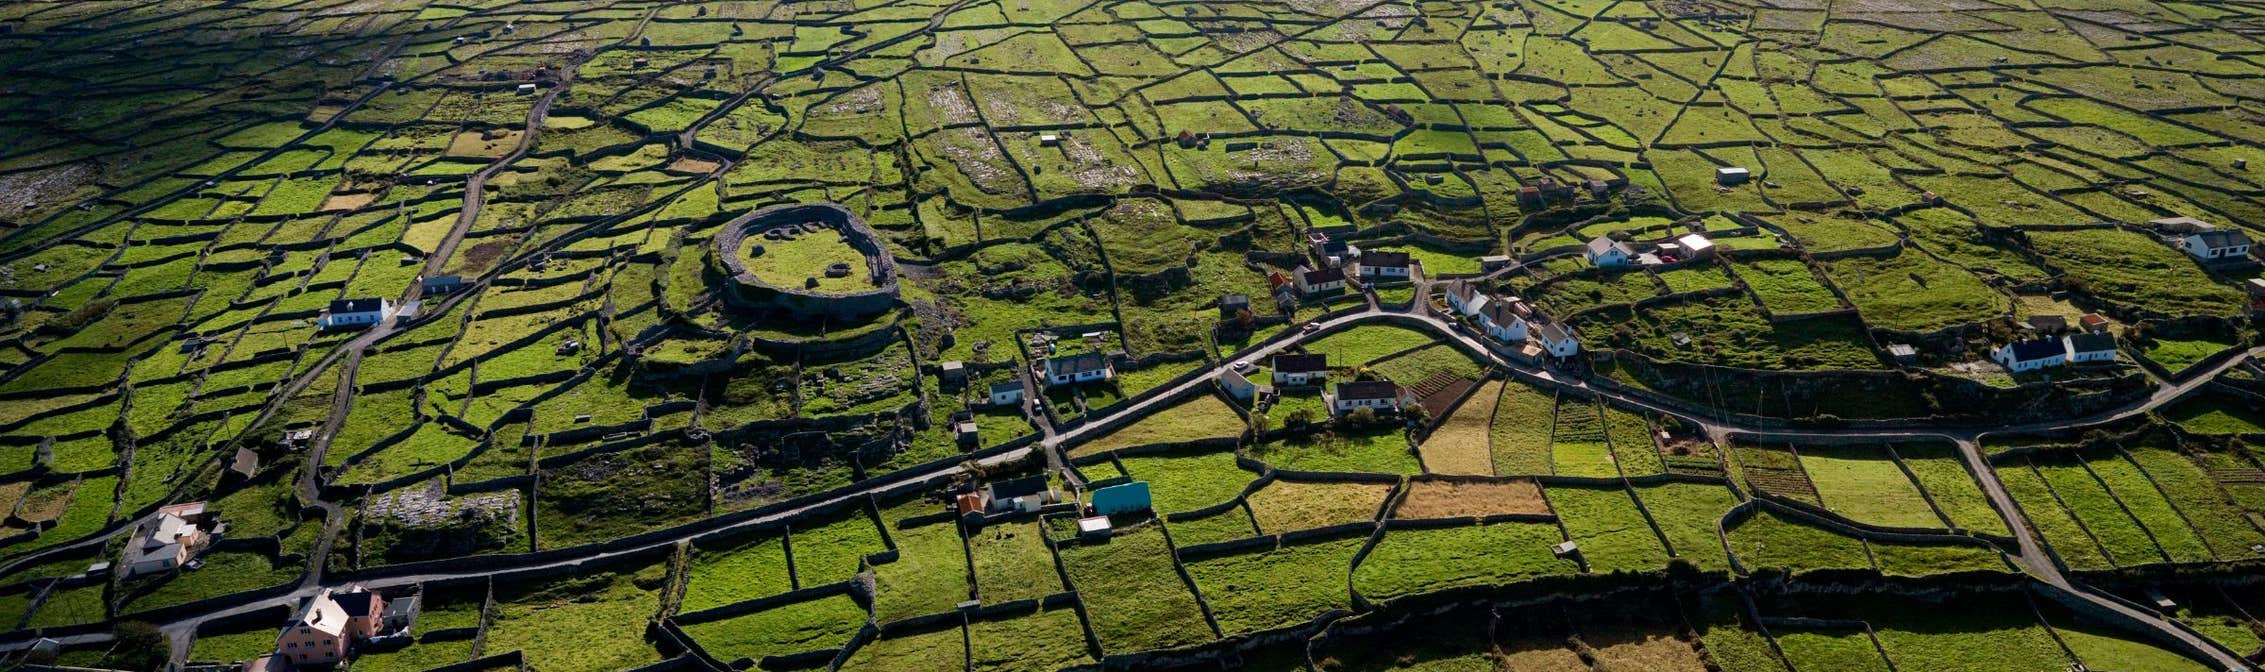 Image of Inishmaan in the Aran Islands in County Galway